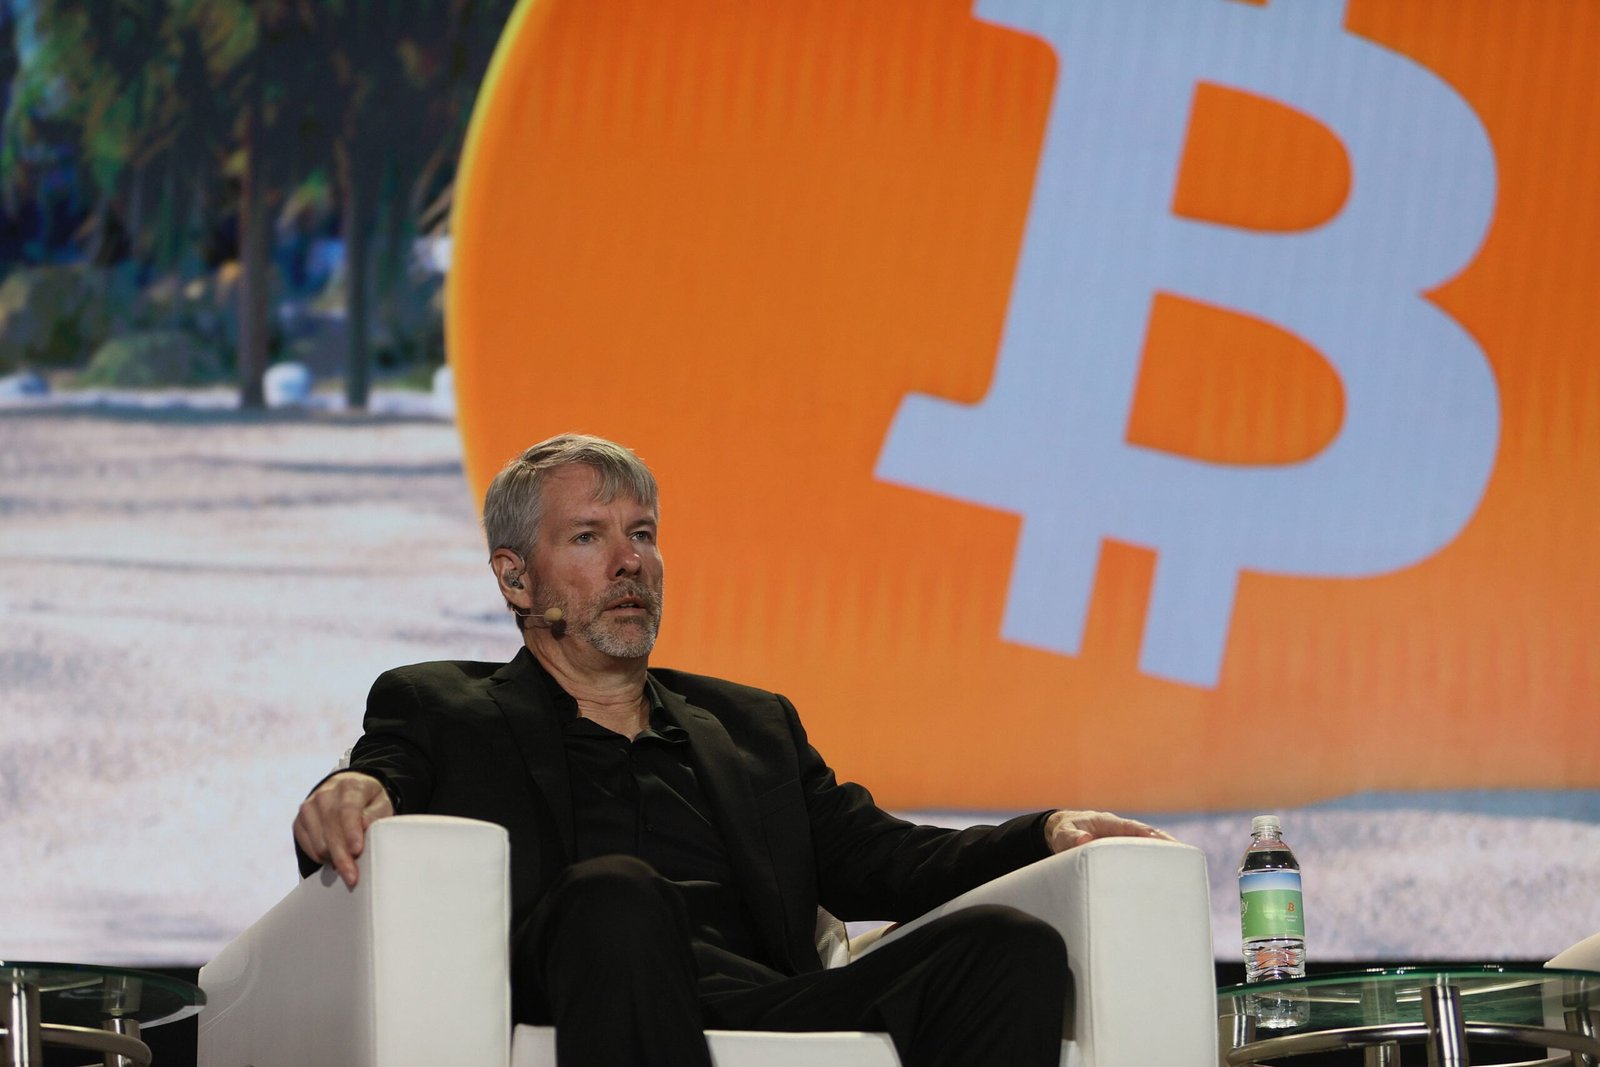 Bitcoin Is Least Risky Thing To Have in a Retirement Portfolio: Michael Saylor